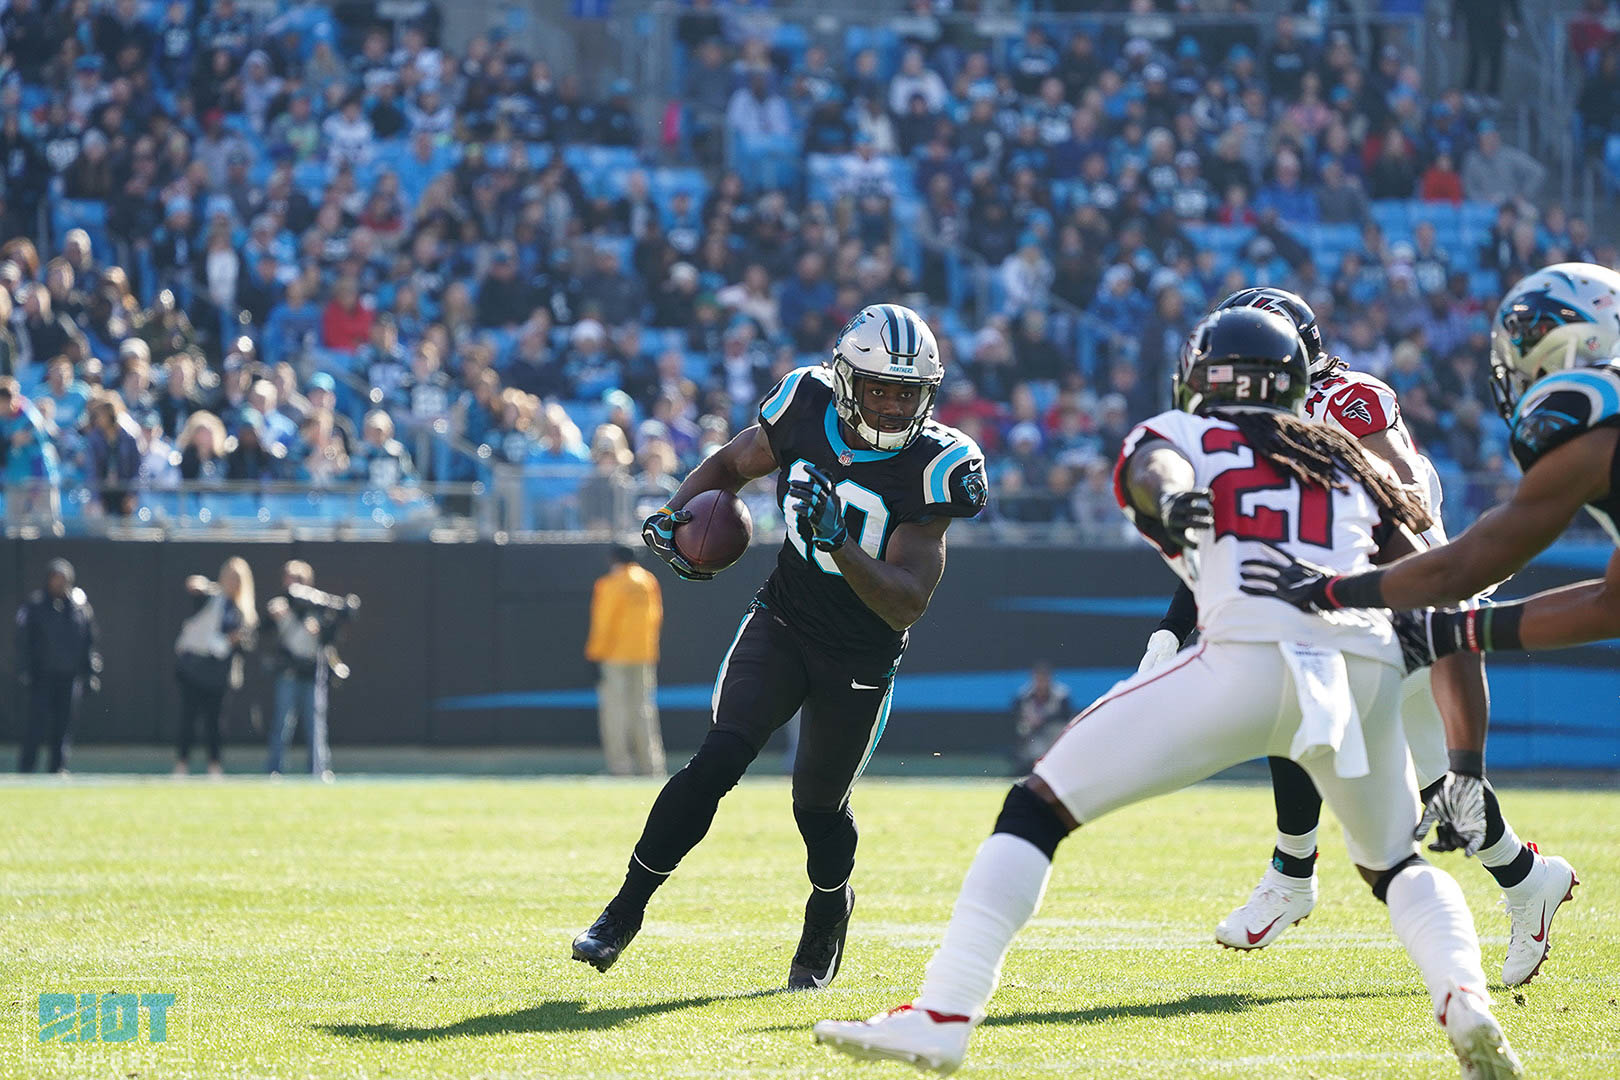 Panthers' Curtis Samuel out for Year With Ankle Injury